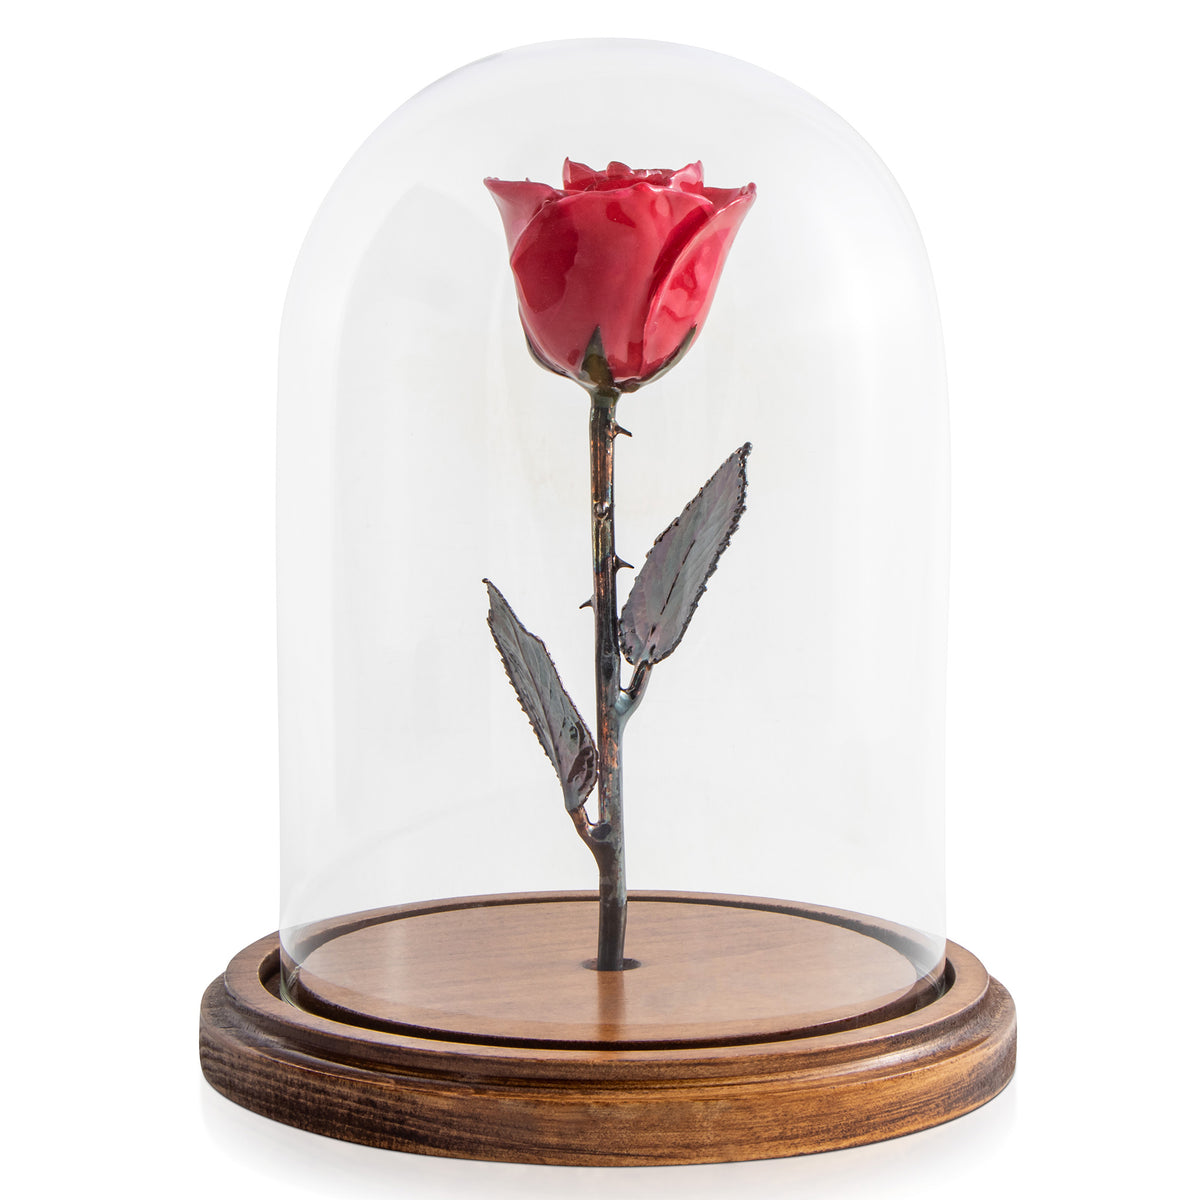 Enchanted Rose Parts - REPLACEMENT GLASS DOME